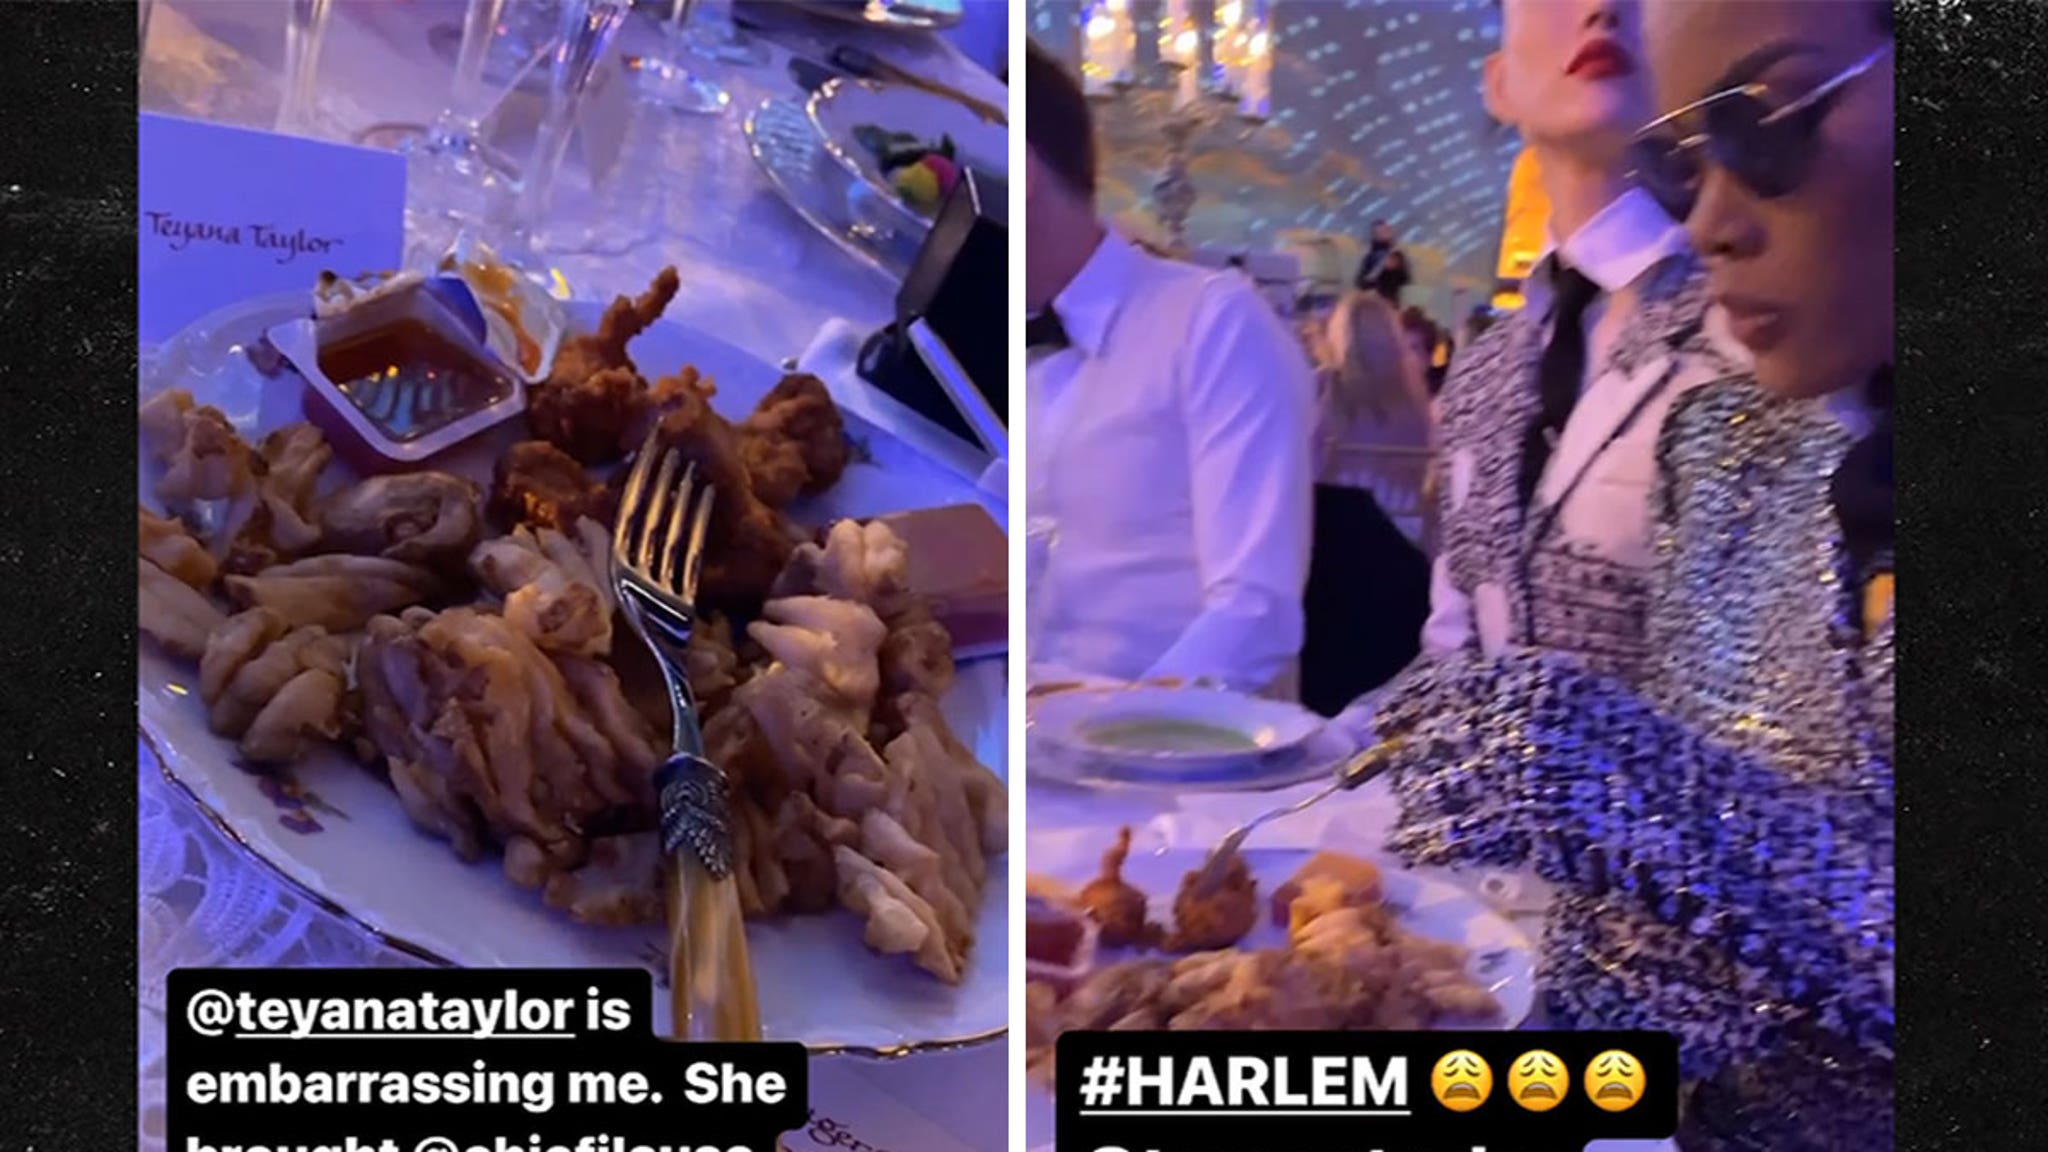 Teyana Taylor Brings Chick-Fil-A to Met Gala, Usher and Pusha T Disapprove